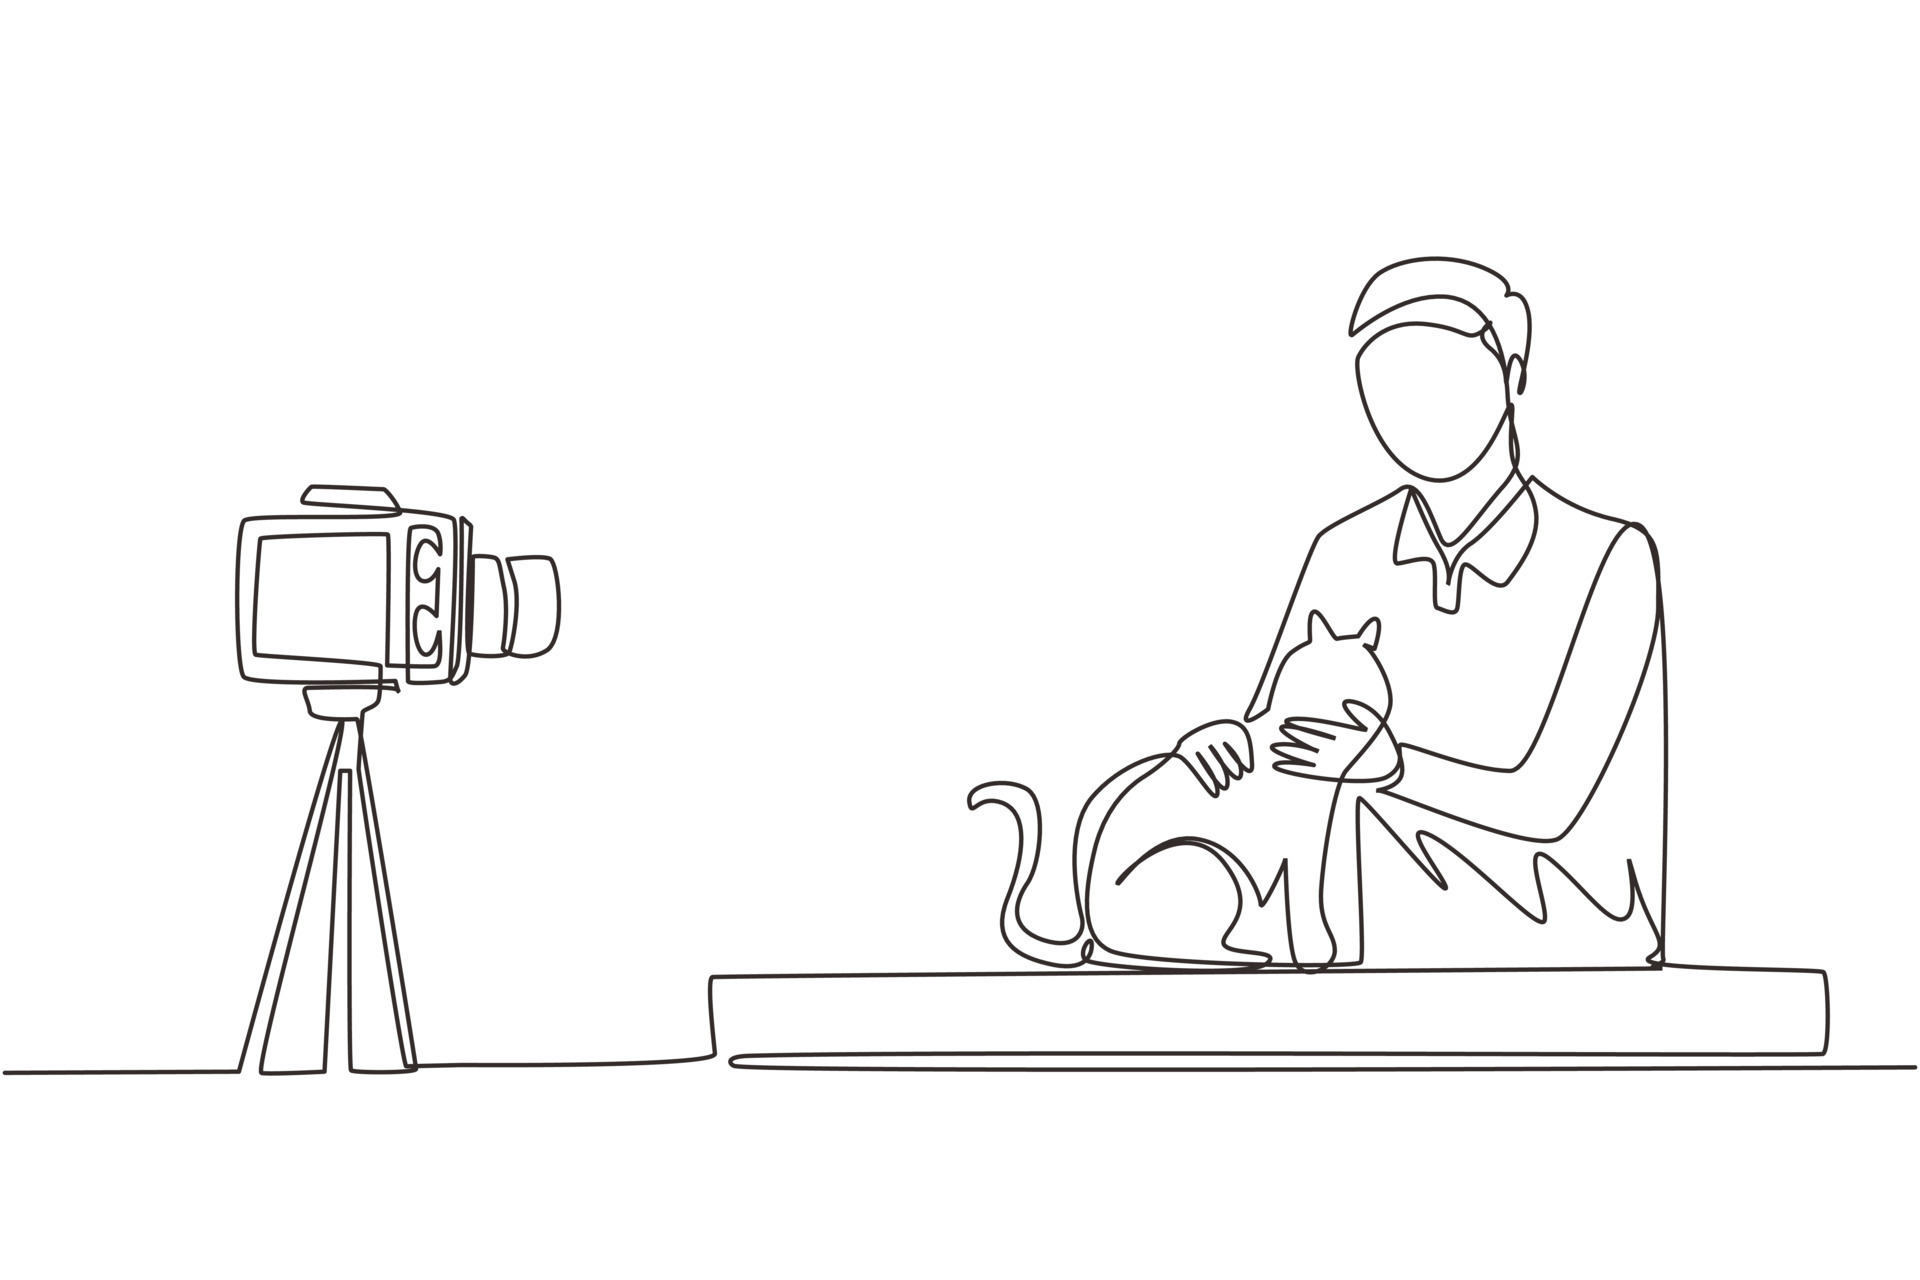 Single one line drawing teenage pet blogger. Teen boy with cat recording  video on camera. Hobbies and leisure, blogging about pet, animal lover.  Continuous line draw design graphic vector illustration 8721215 Vector